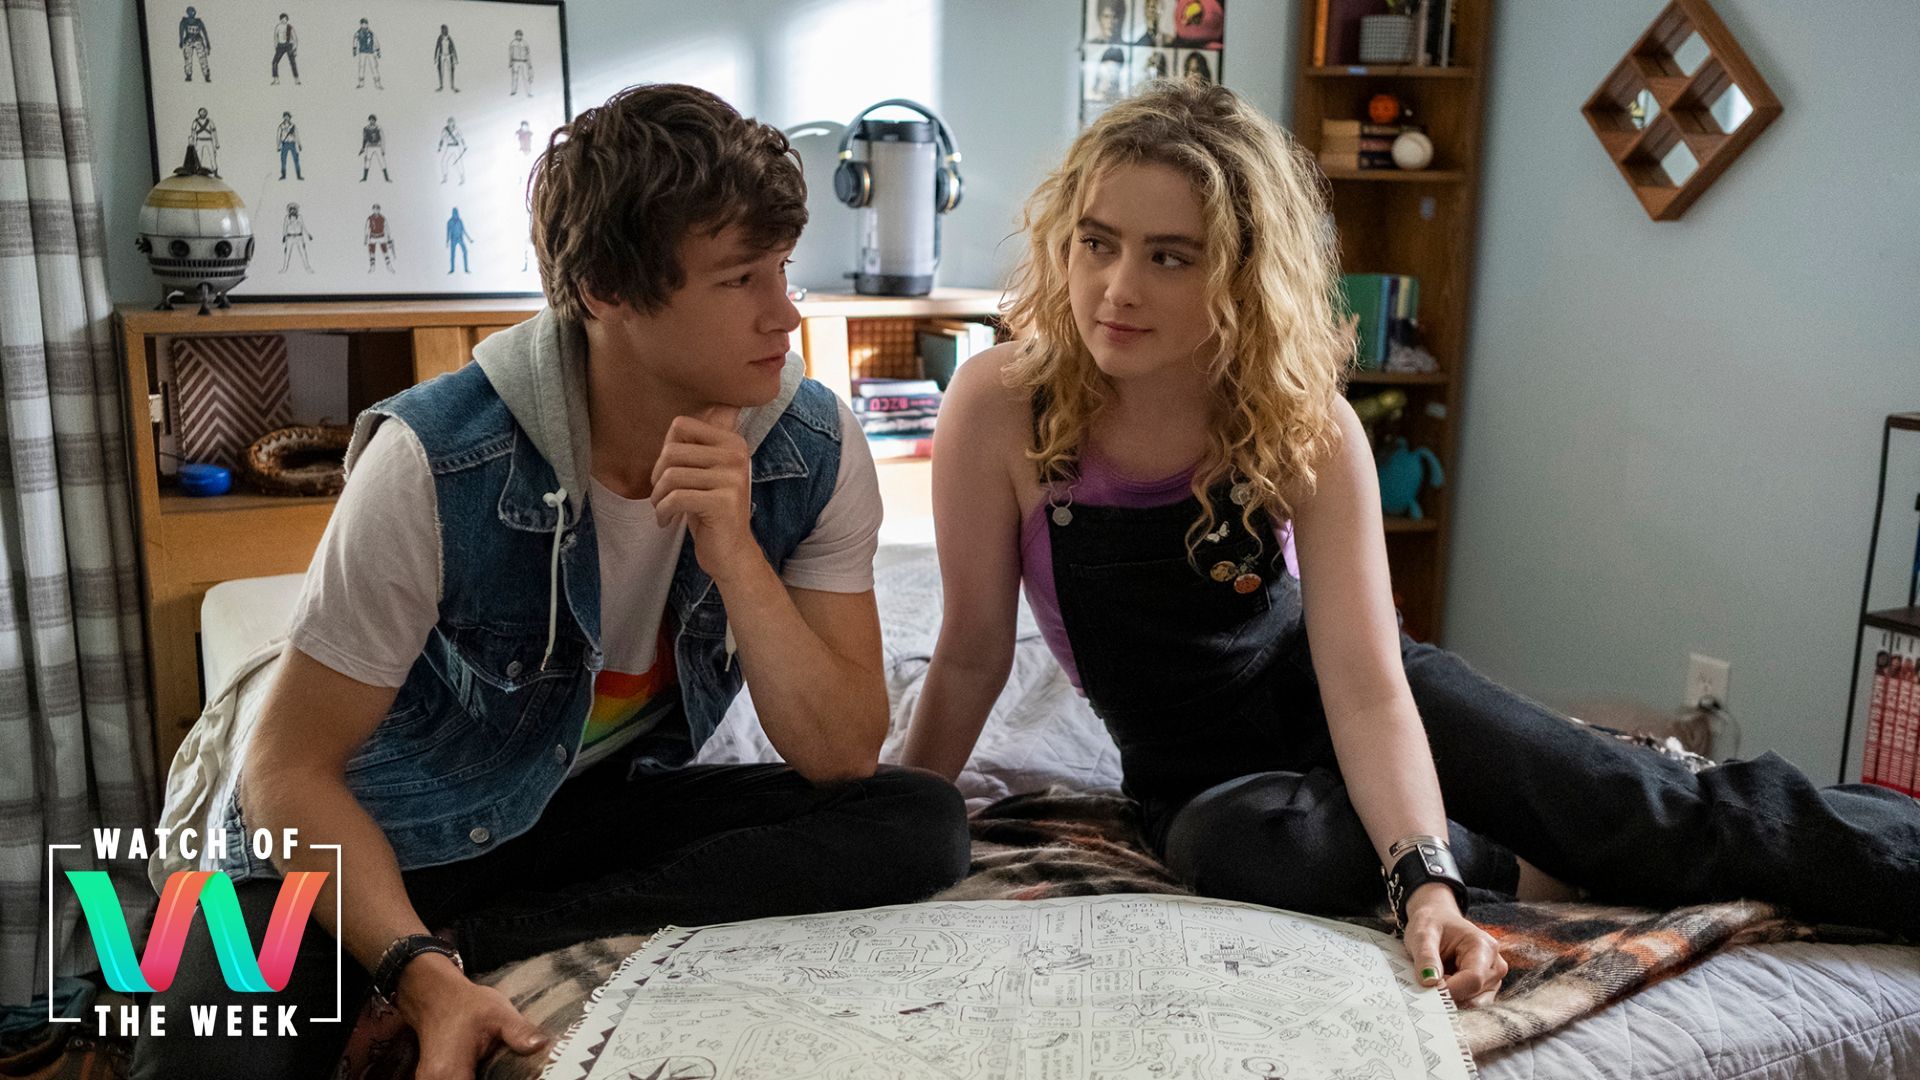 Amazon's 'The Map of Tiny Perfect Things' Puts A Sweet Teenage Spin On The Time Loop Story